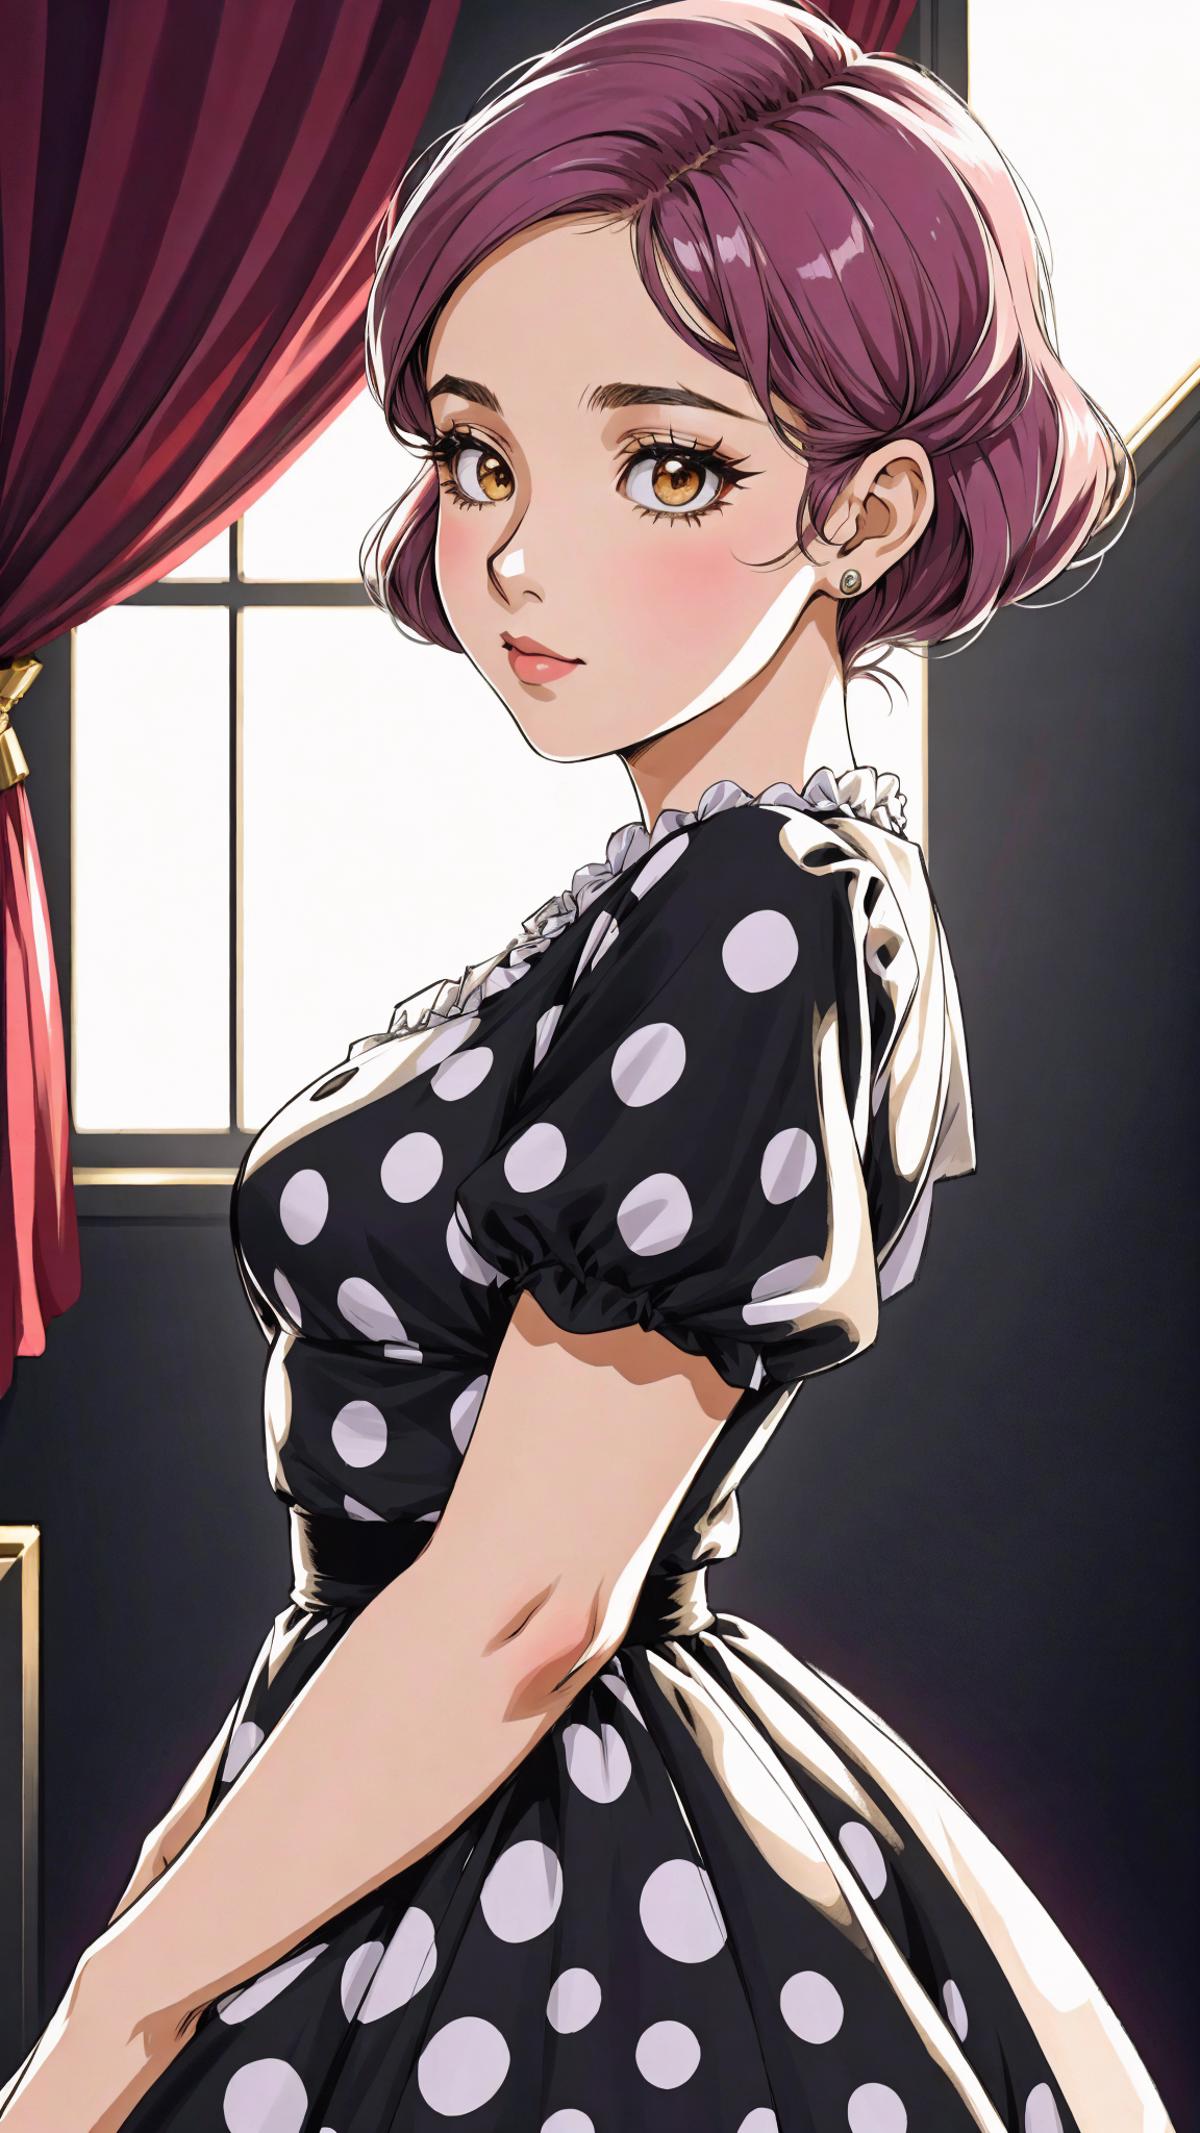 An Anime-style drawing of a woman wearing a black dress with polka dots.